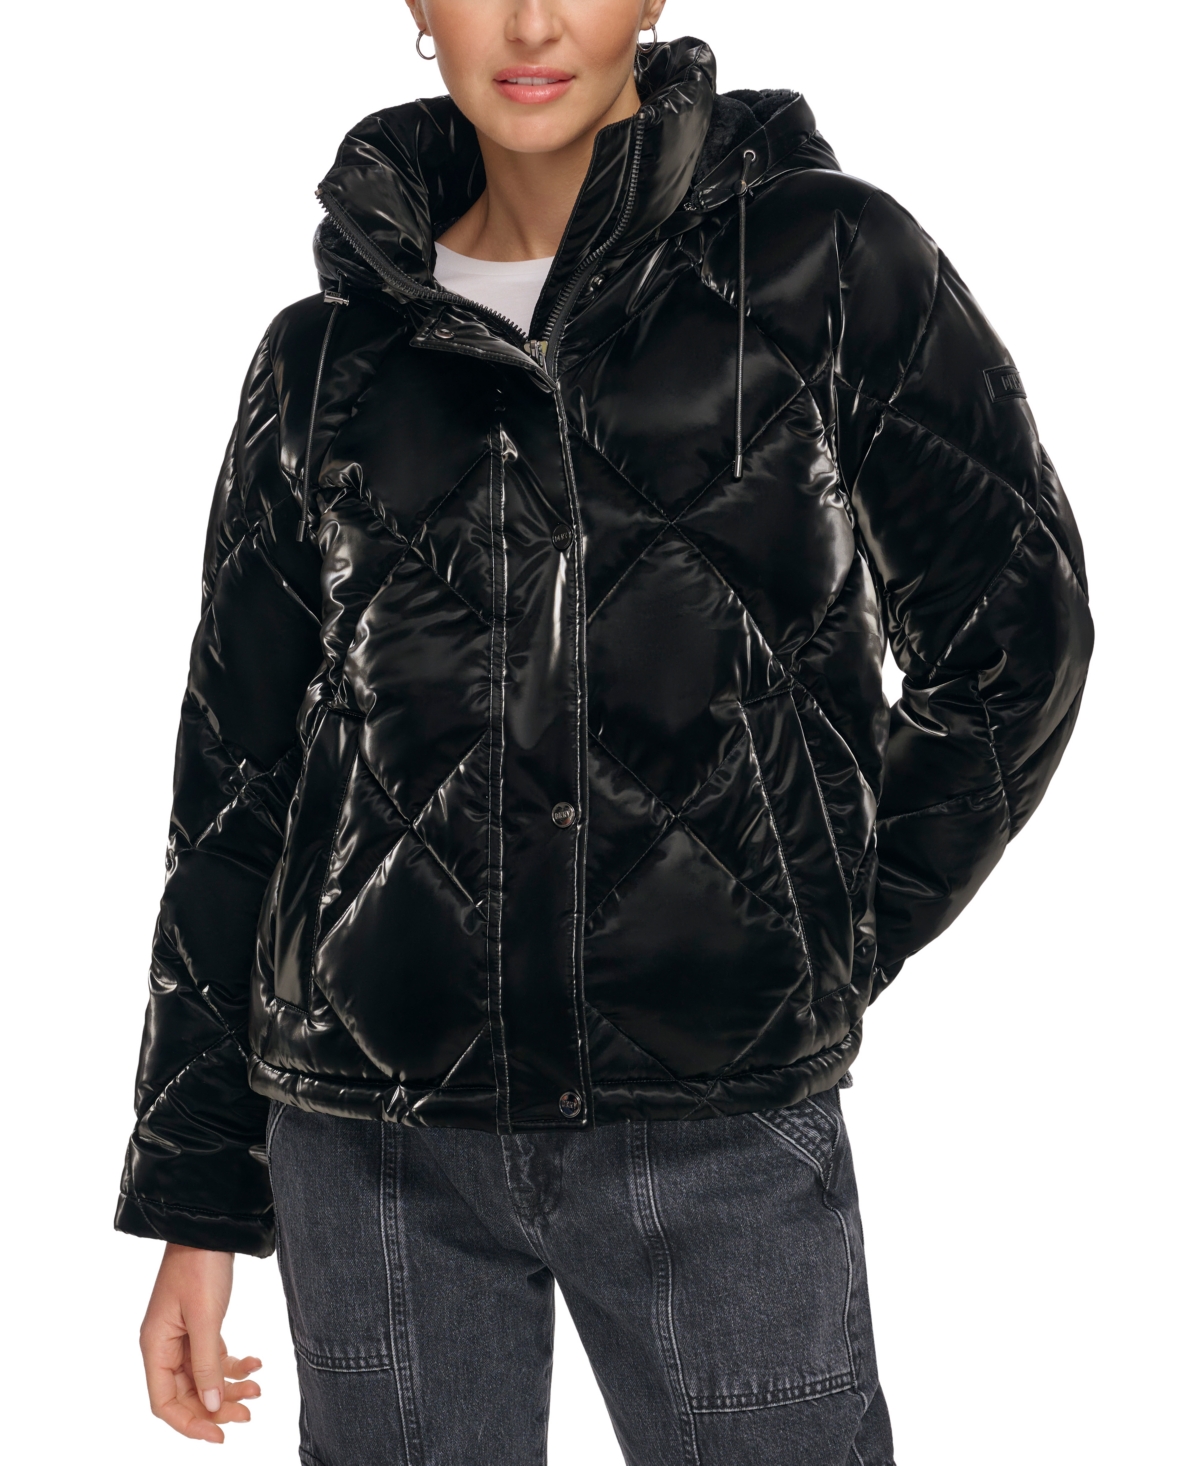 Dkny Women's Diamond Quilted Hooded Puffer Coat In Shiny Black